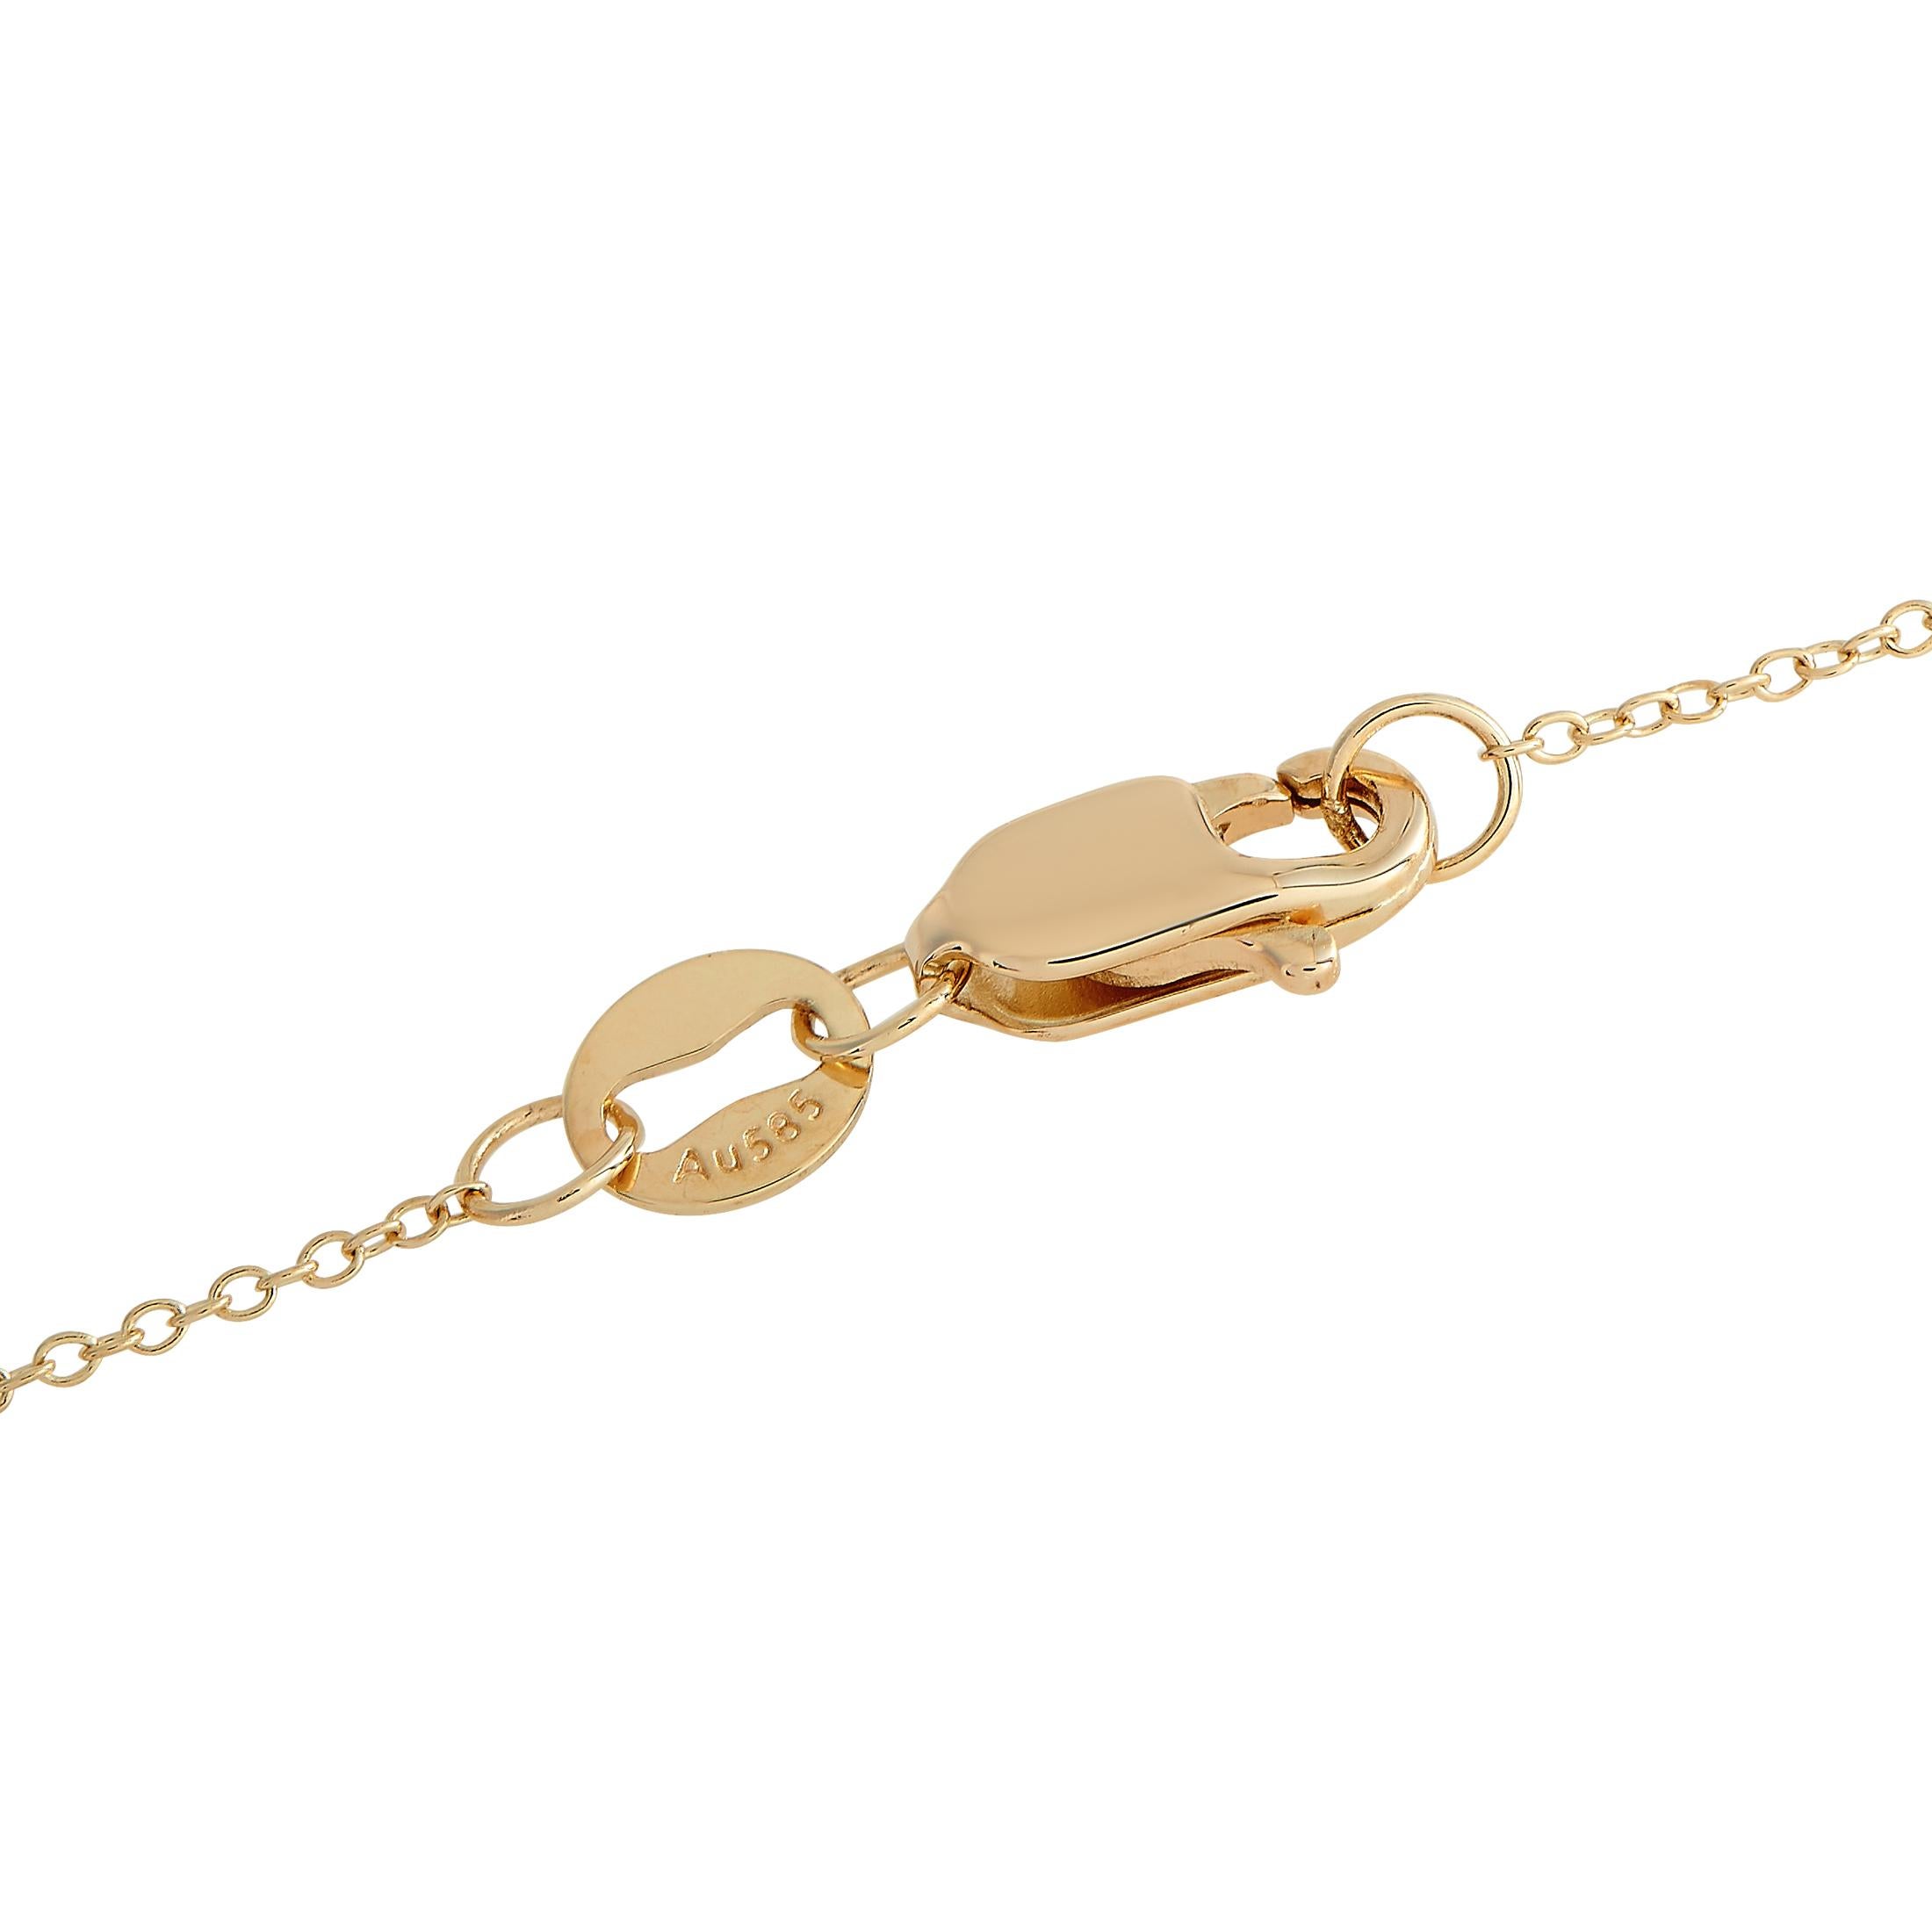 This carefully crafted 14K yellow gold necklace is simple, elegant, and understated. At the center of the 16 chain, youll find a teardrop shaped pendant that comes to life thanks to inset diamond accents totaling 0.10 carats. The pendant measures